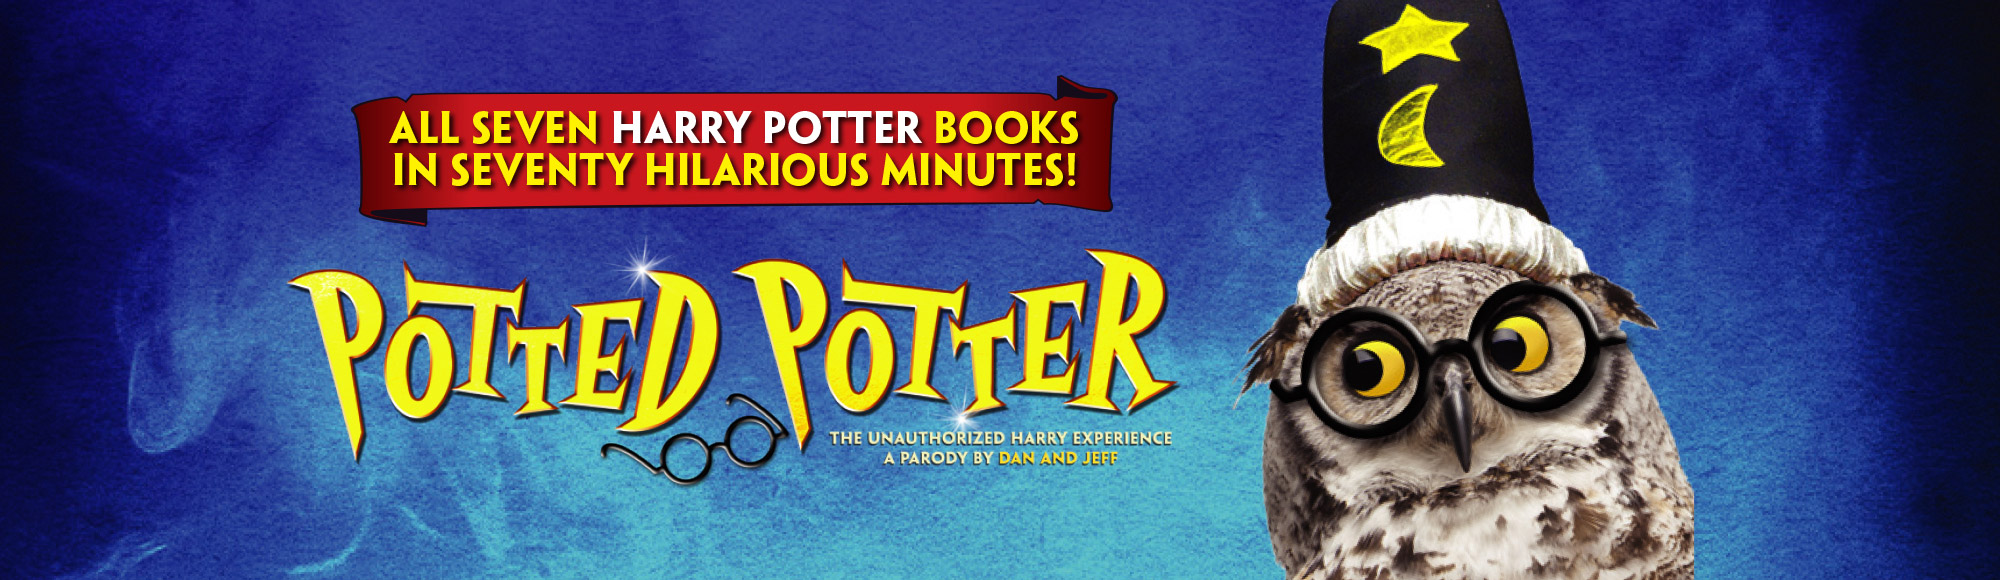 Potted Potter - All 7 Harry Potter books in 70 minutes show